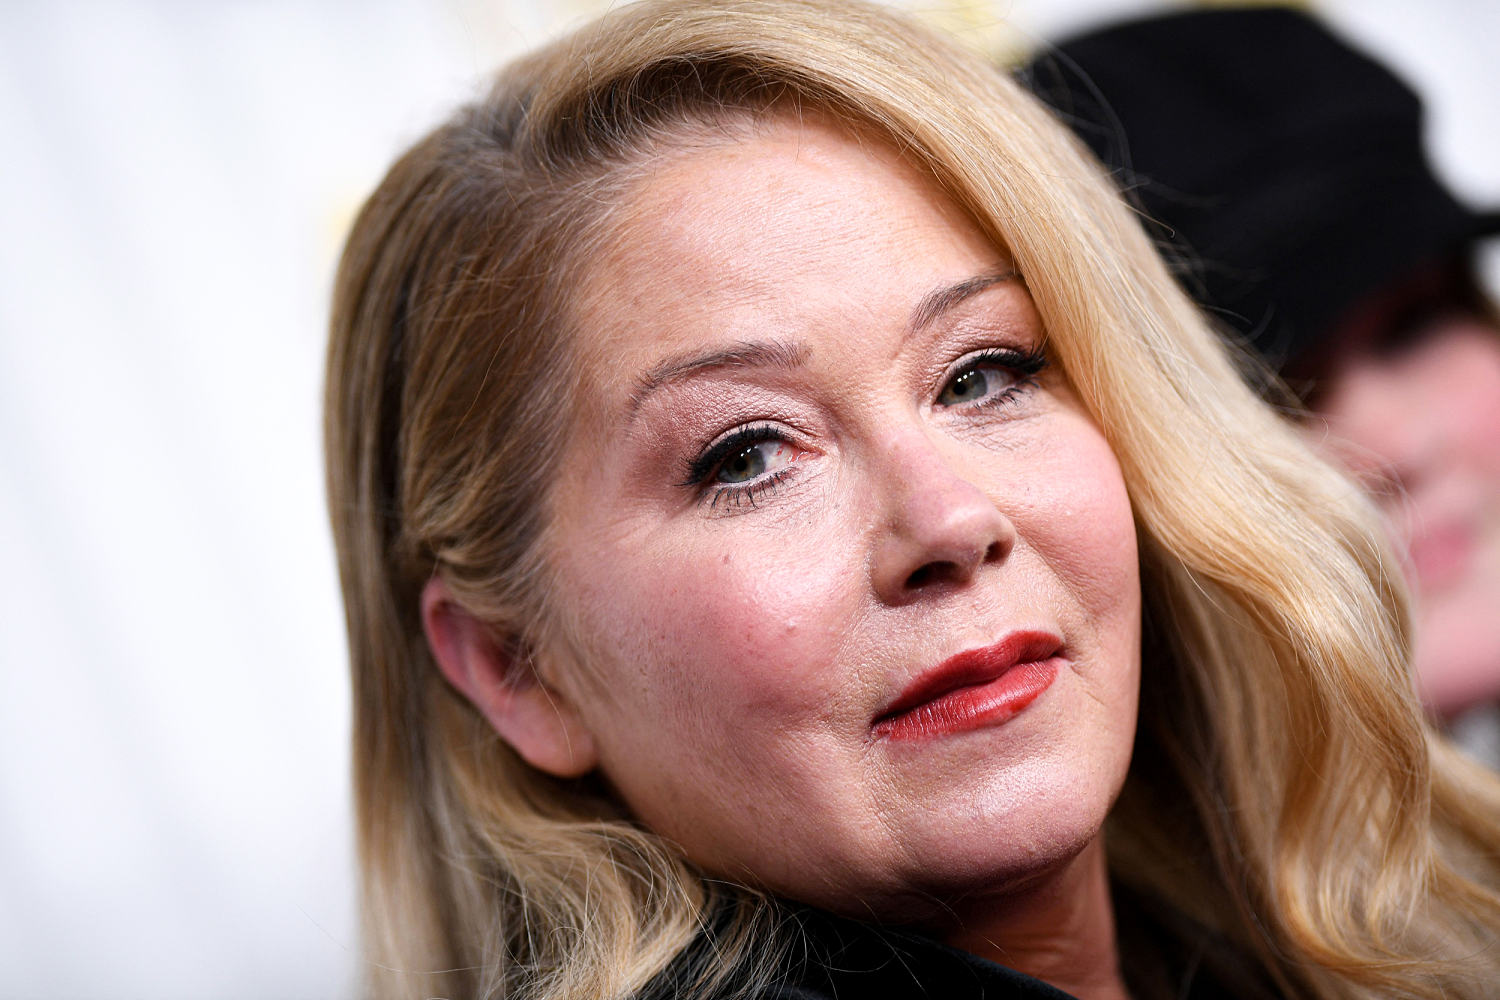 Christina Applegate gets graphic about symptoms after eating 'someone else's poop bacteria'